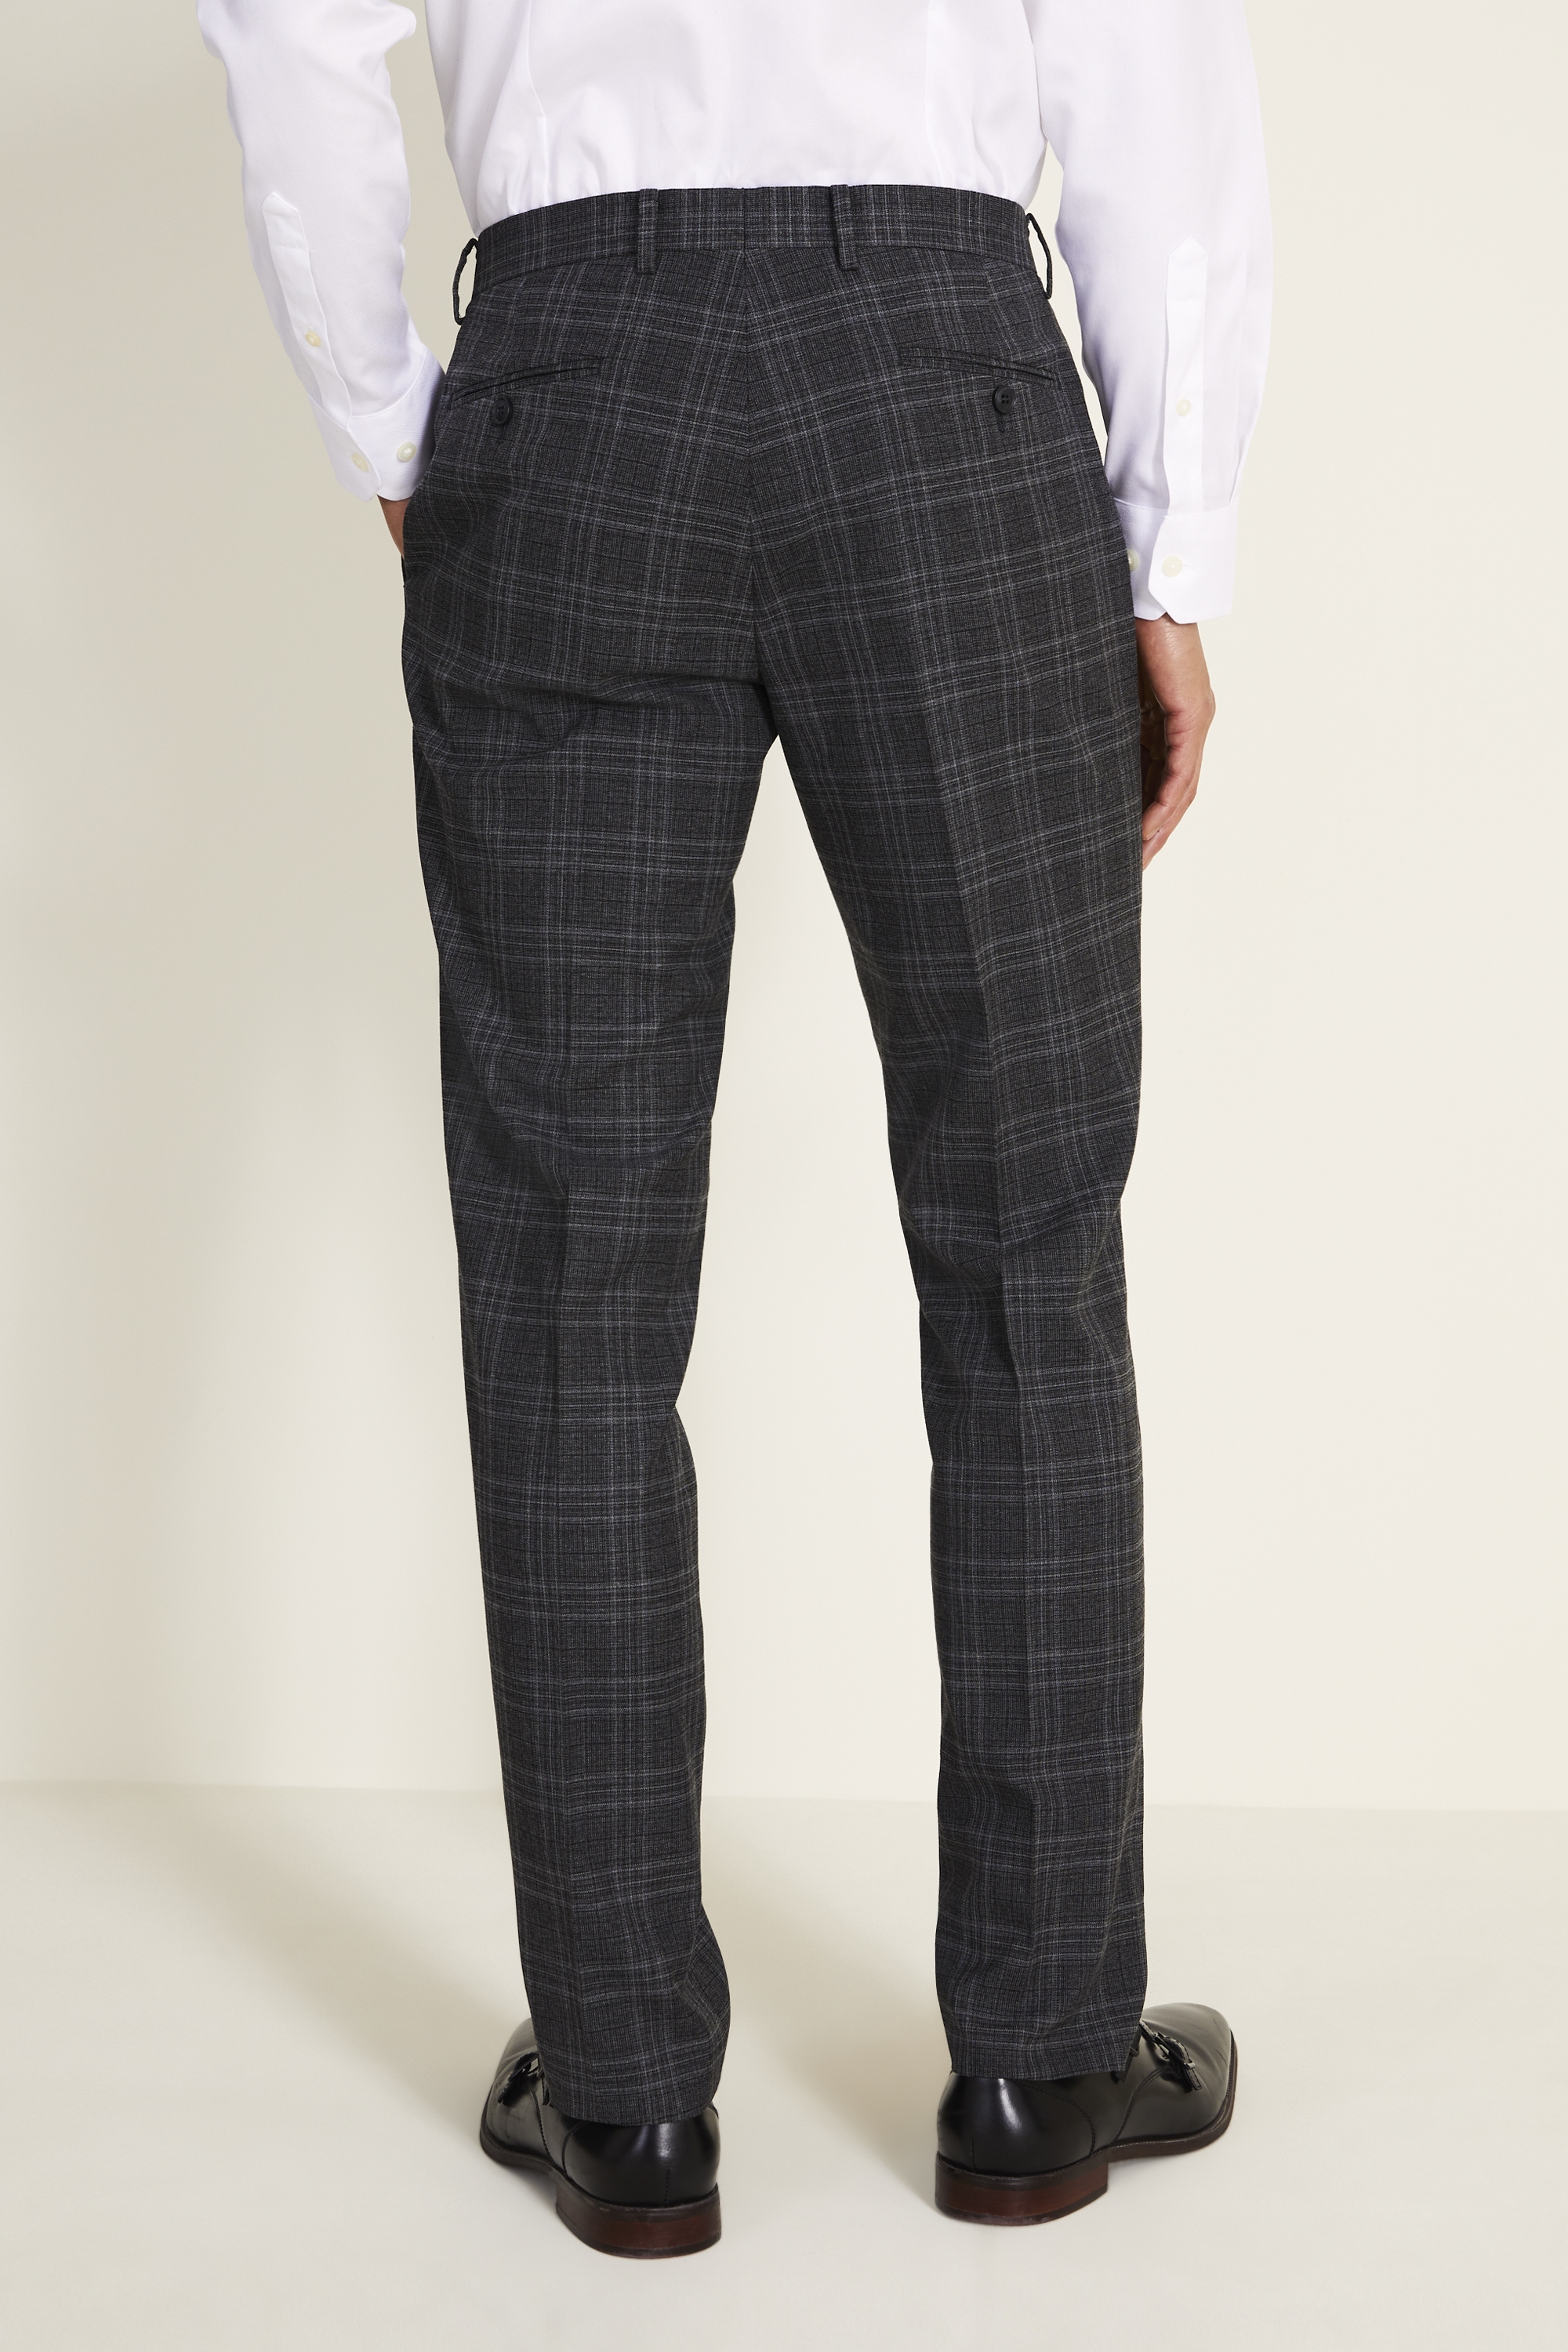 Tailored Fit Charcoal Check Trouser | Buy Online at Moss